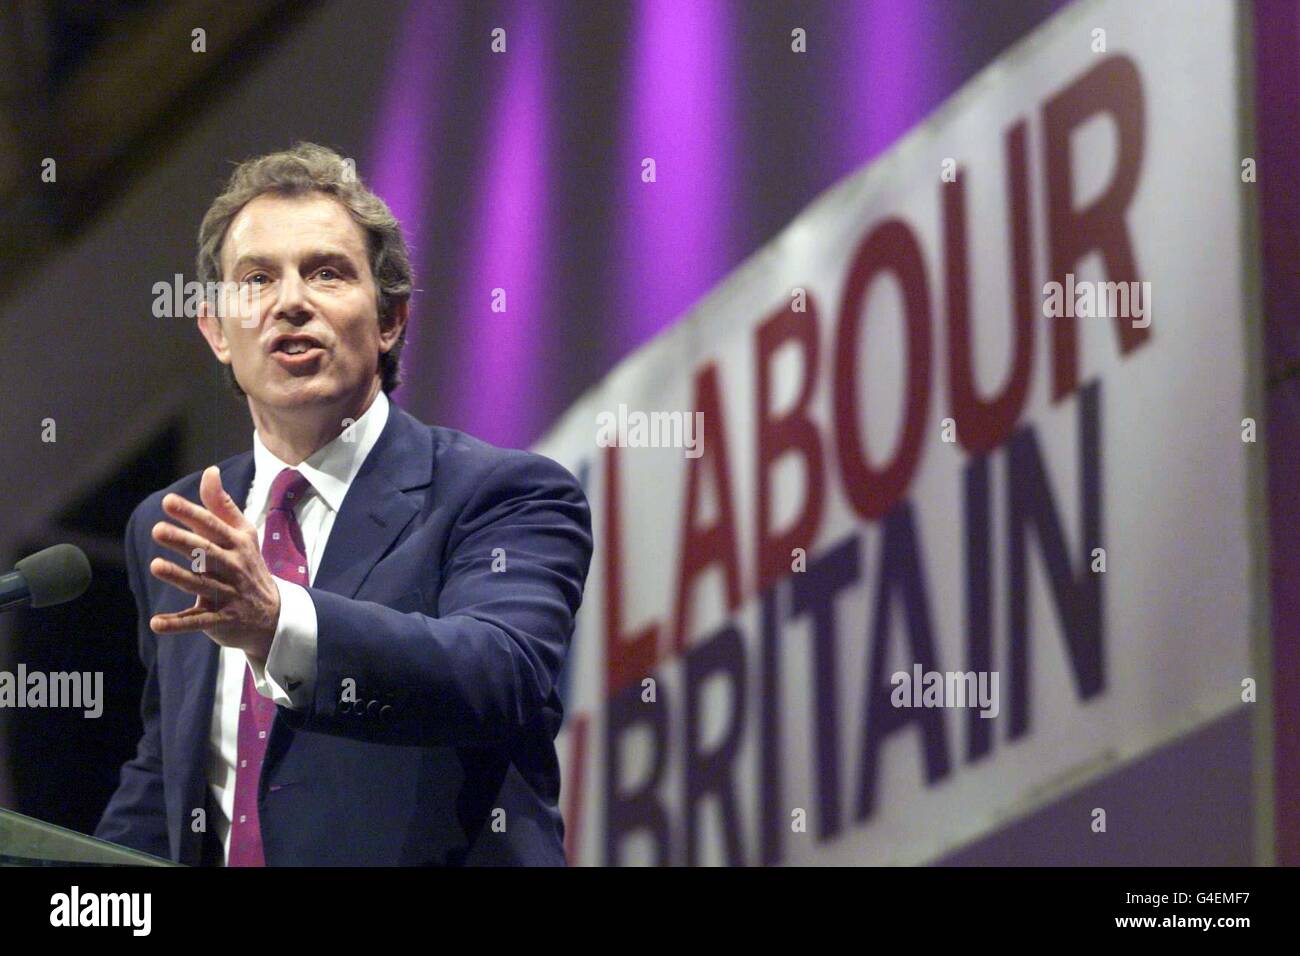 Prime Minister Tony Blair delivers his speech to the Labour Party Conference in Blackpool today (Tuesday). PHOTO OWEN HUMPHREYS/PA.EDI. Stock Photo